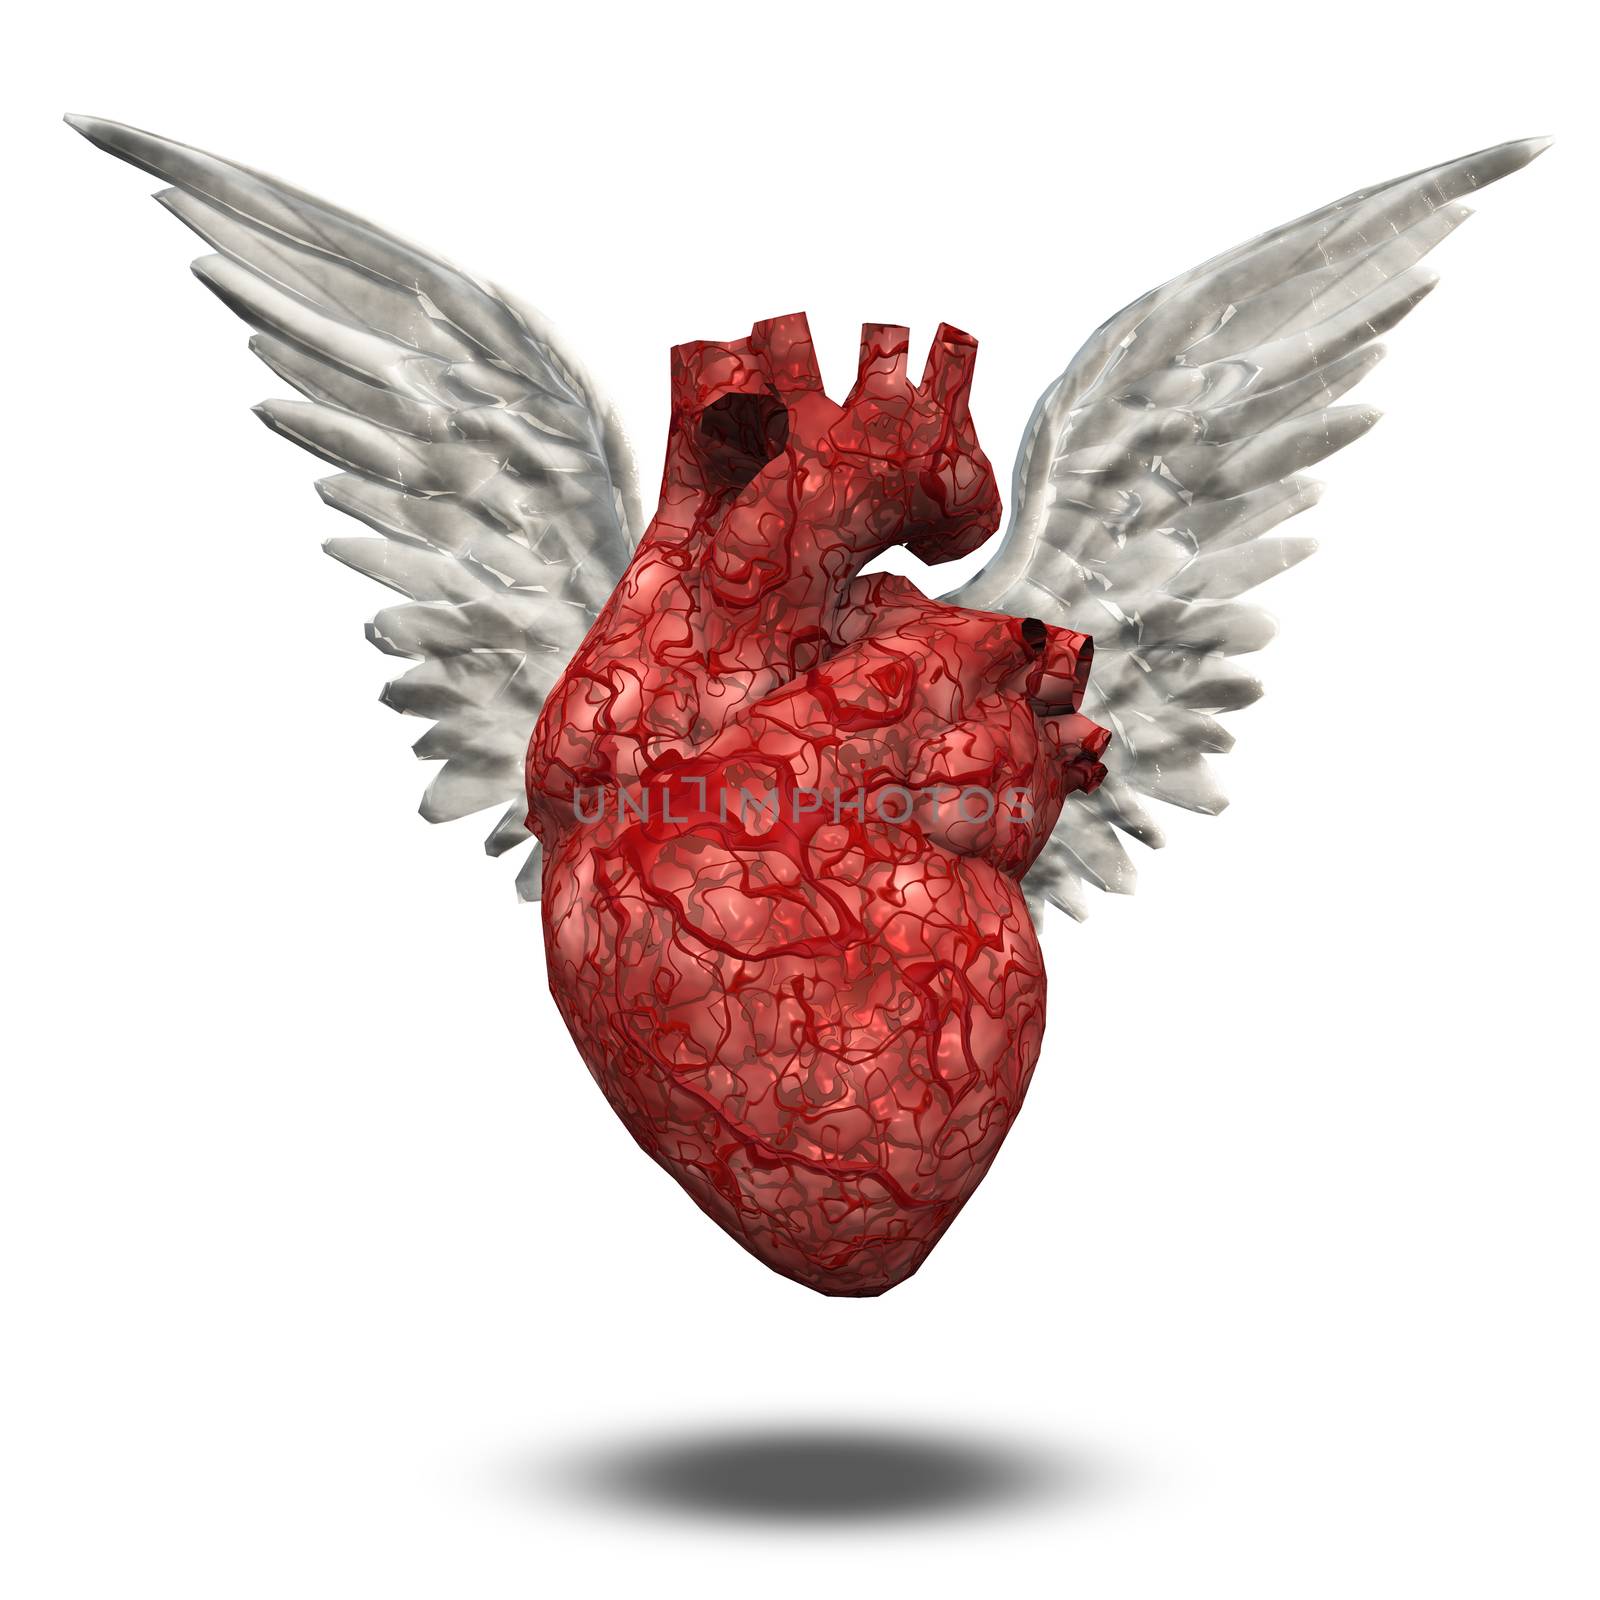 Human heart with white wings